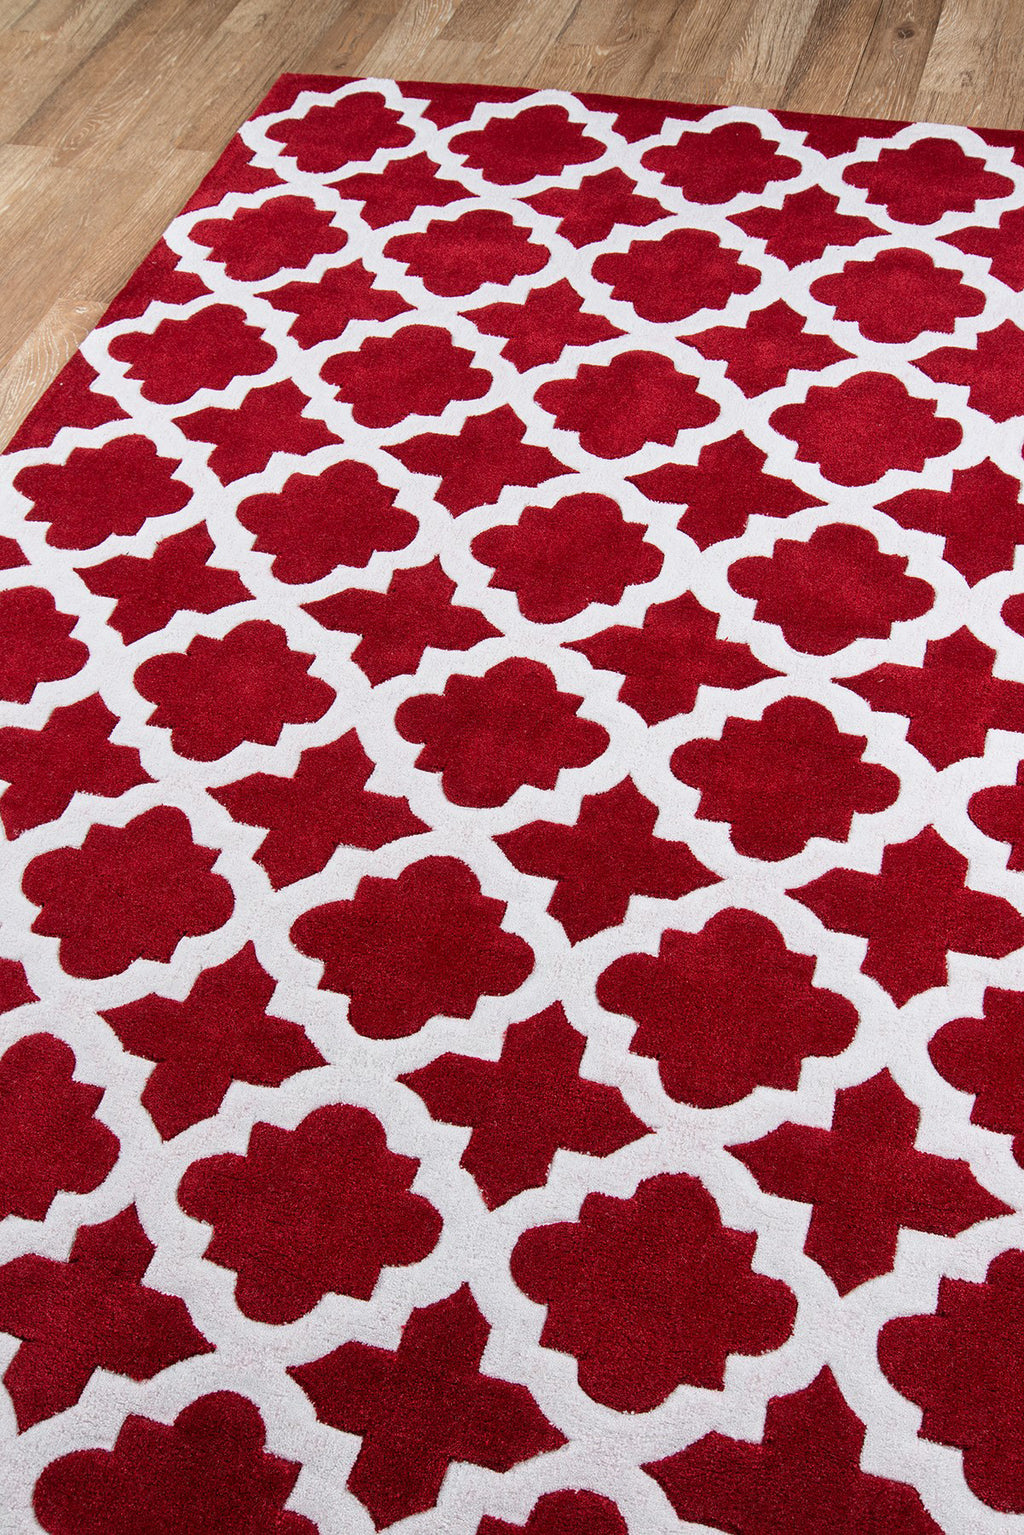 Momeni Bliss BS-26 Red Area Rug Corner Shot Feature